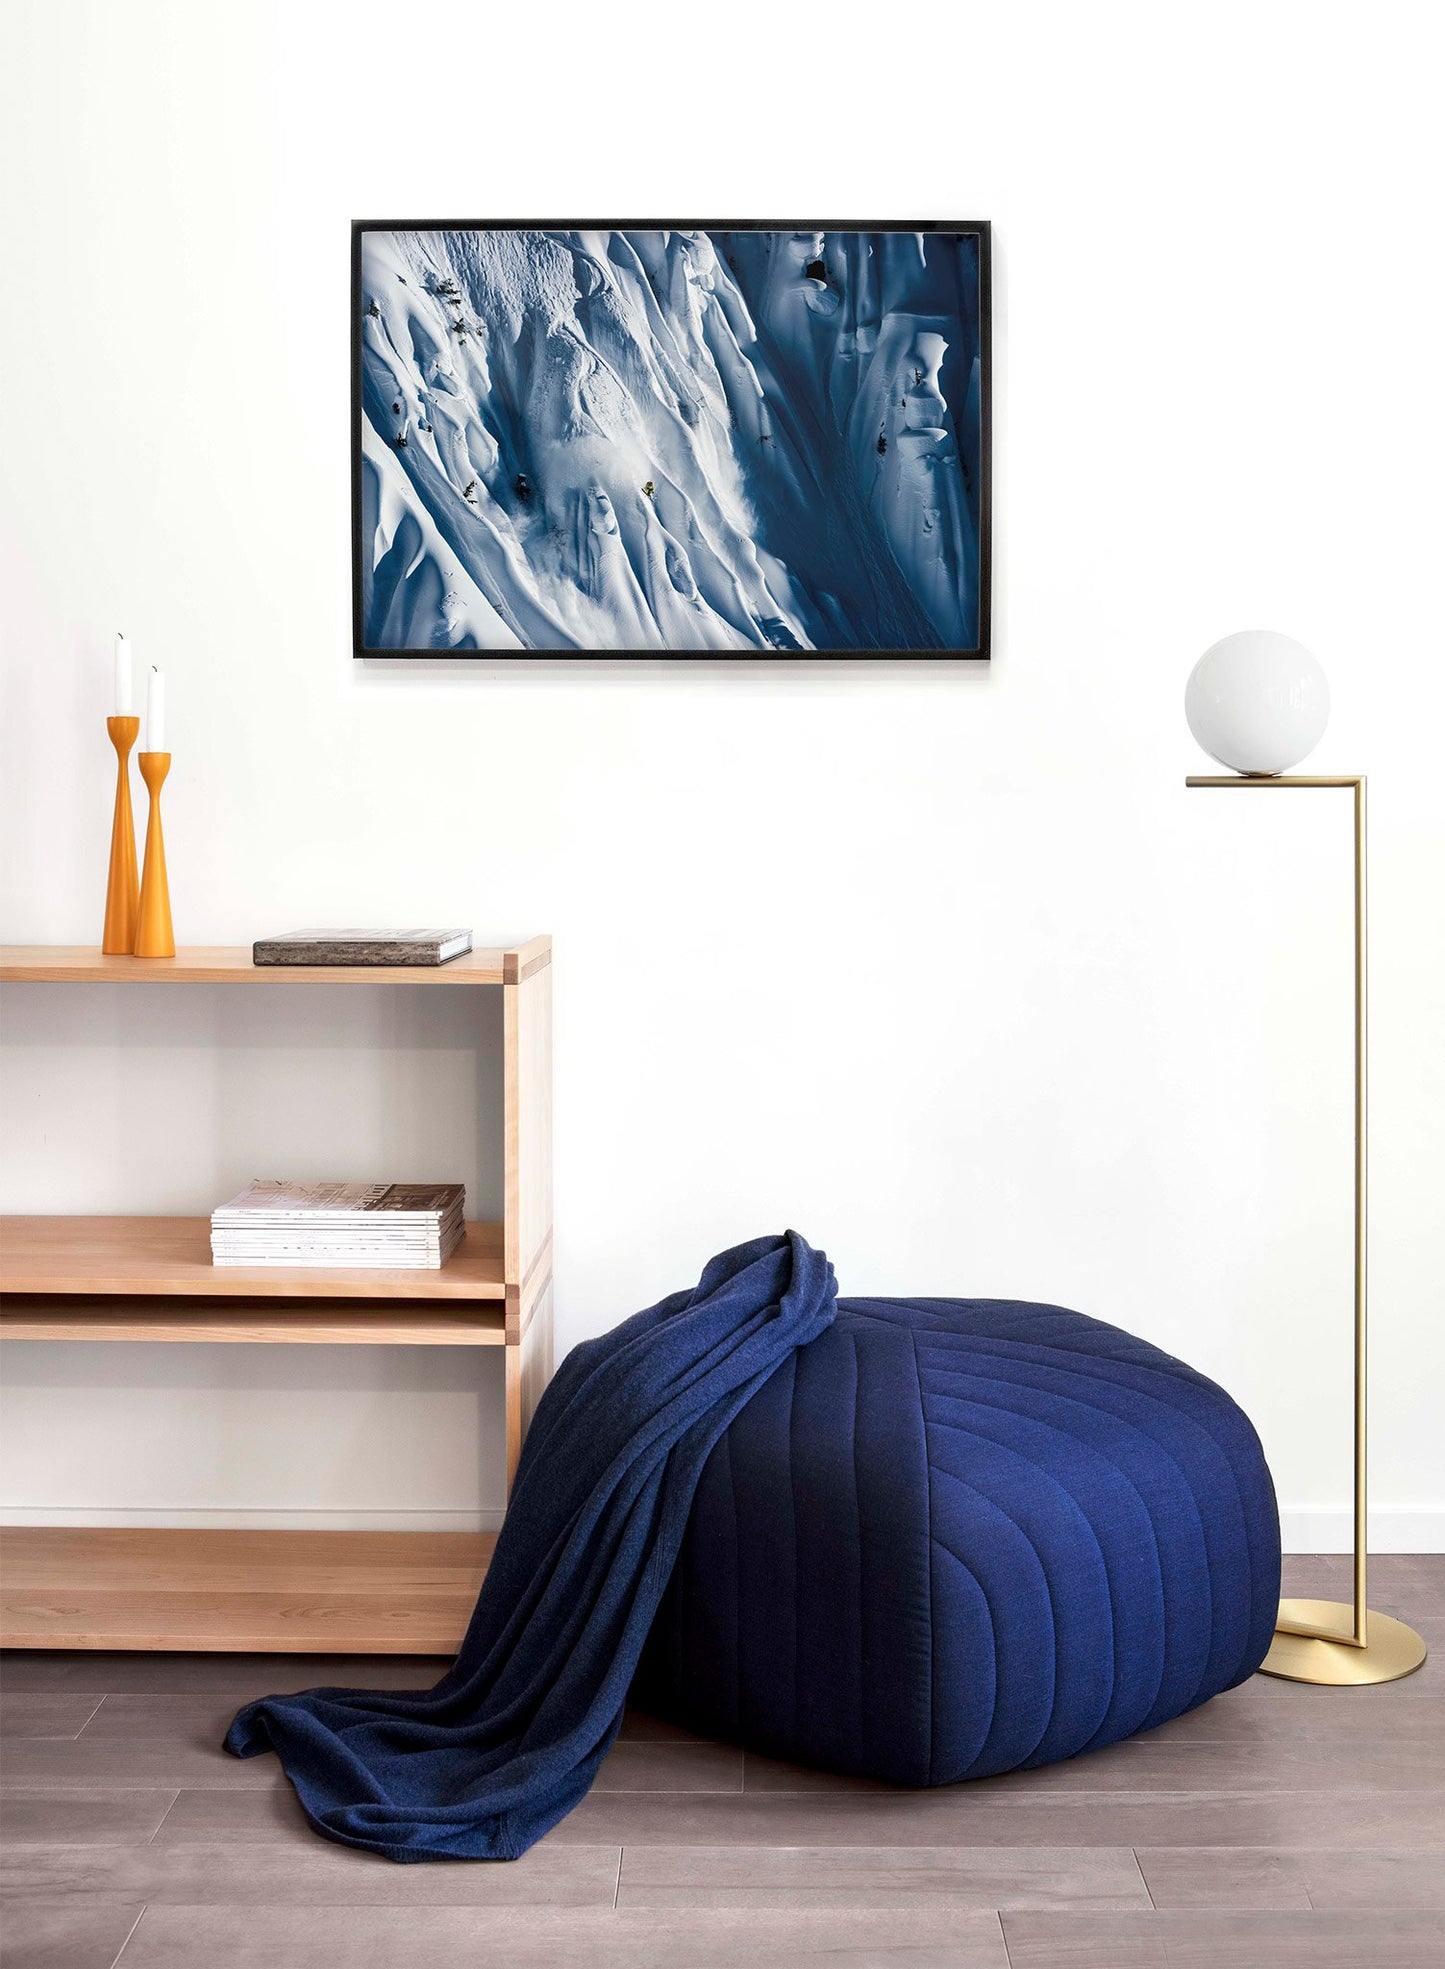 Landscape photography poster by Opposite Wall with snowy mountain avalanche - Lifestyle - Living Room